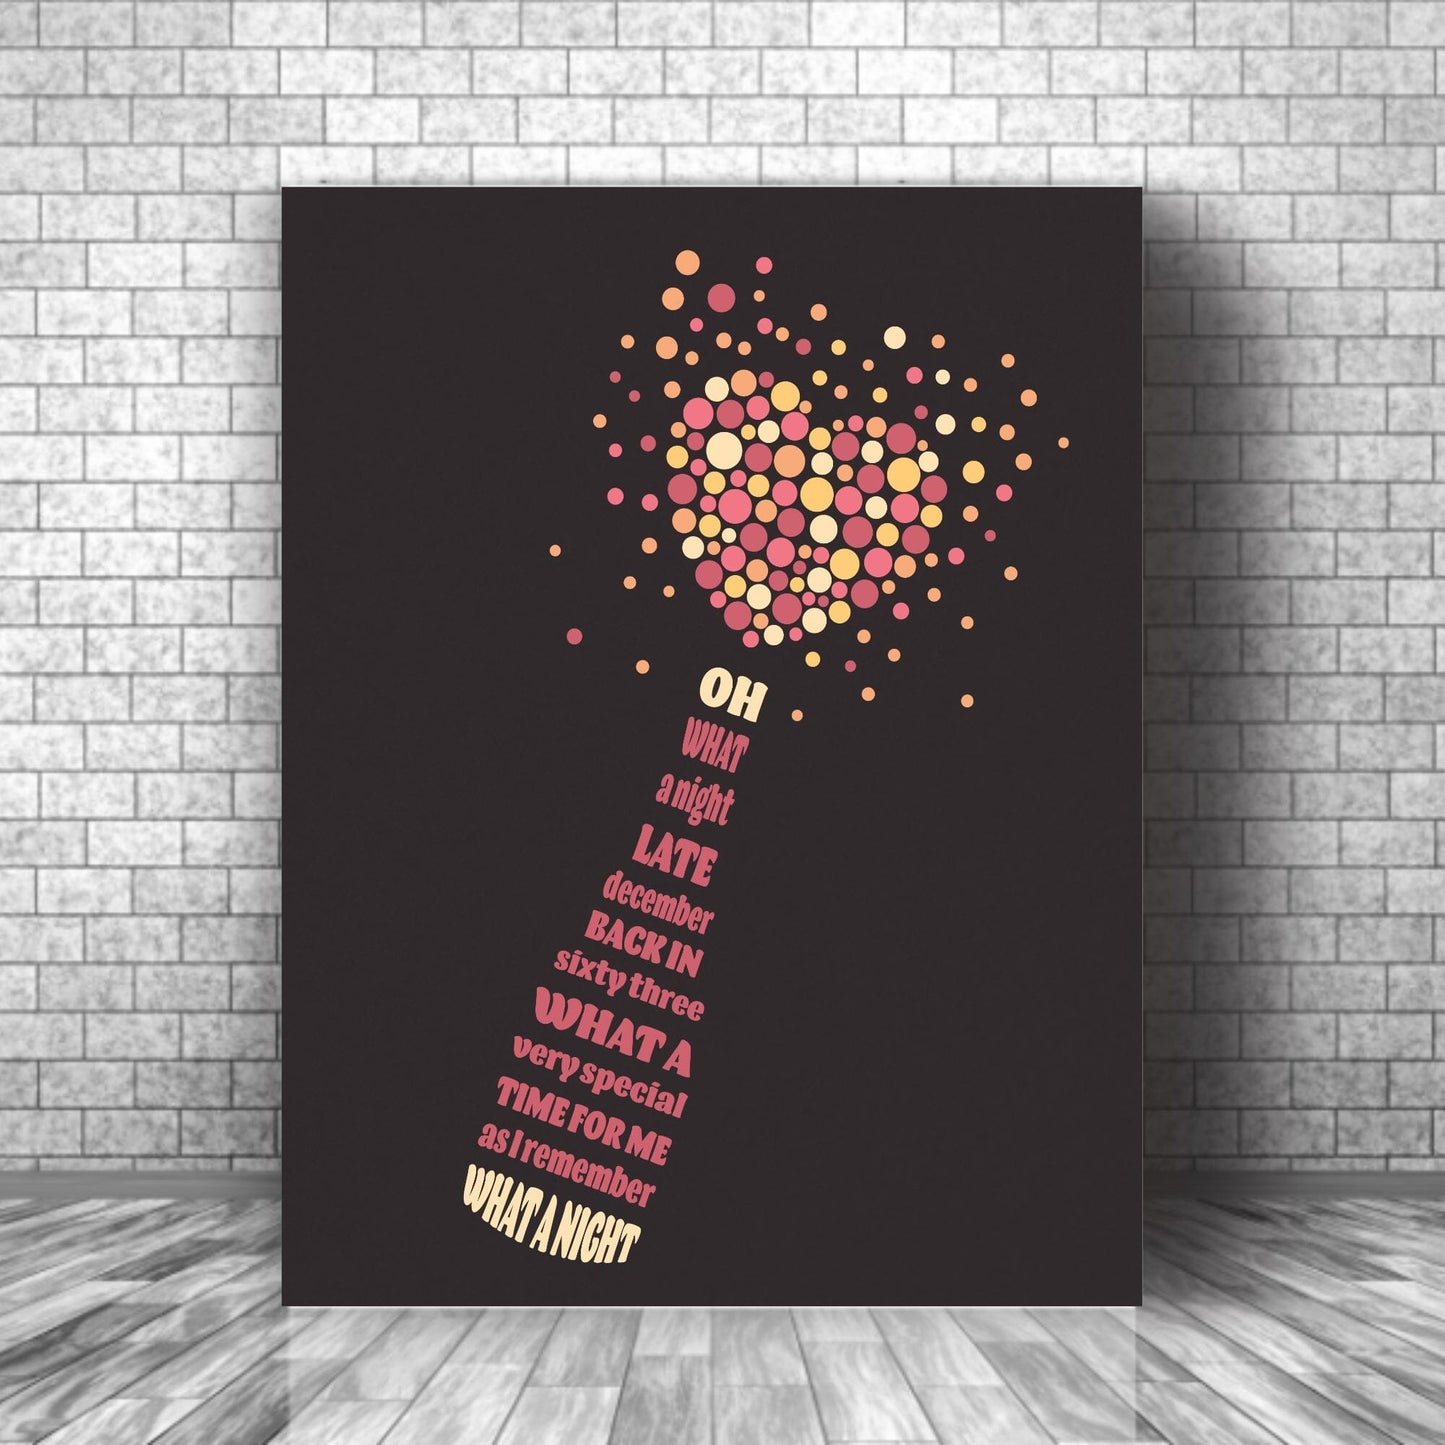 December 1963 by The Four Seasons - Song Lyric 70s Music Art Song Lyrics Art Song Lyrics Art 11x14 Canvas Wrap 